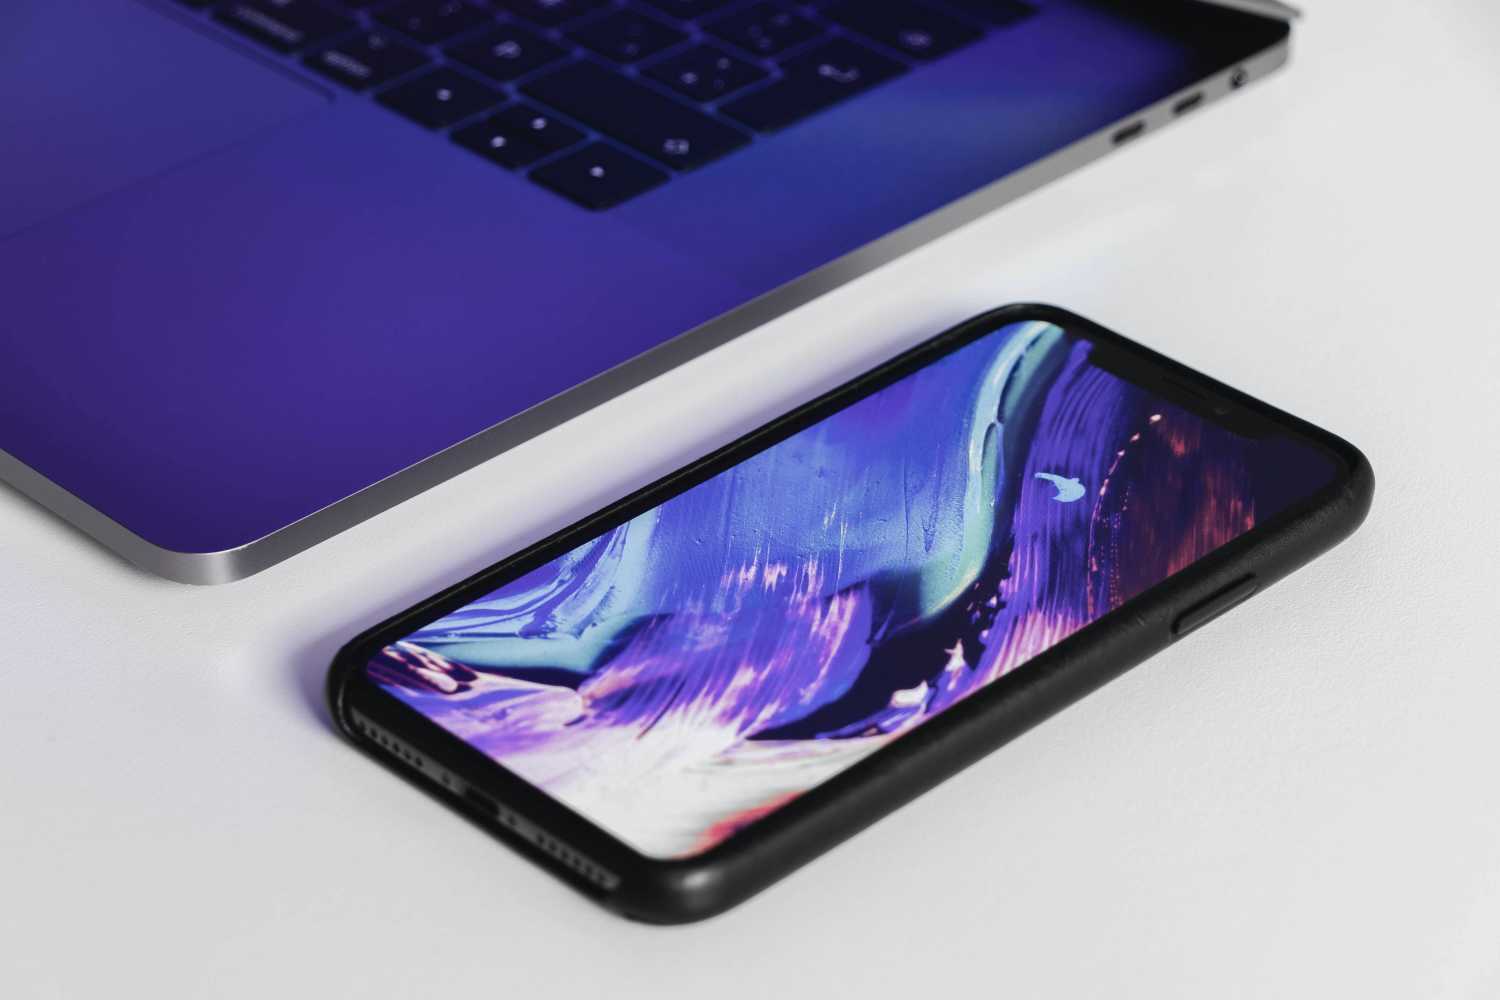 iPhone with colorful image next to MacBook